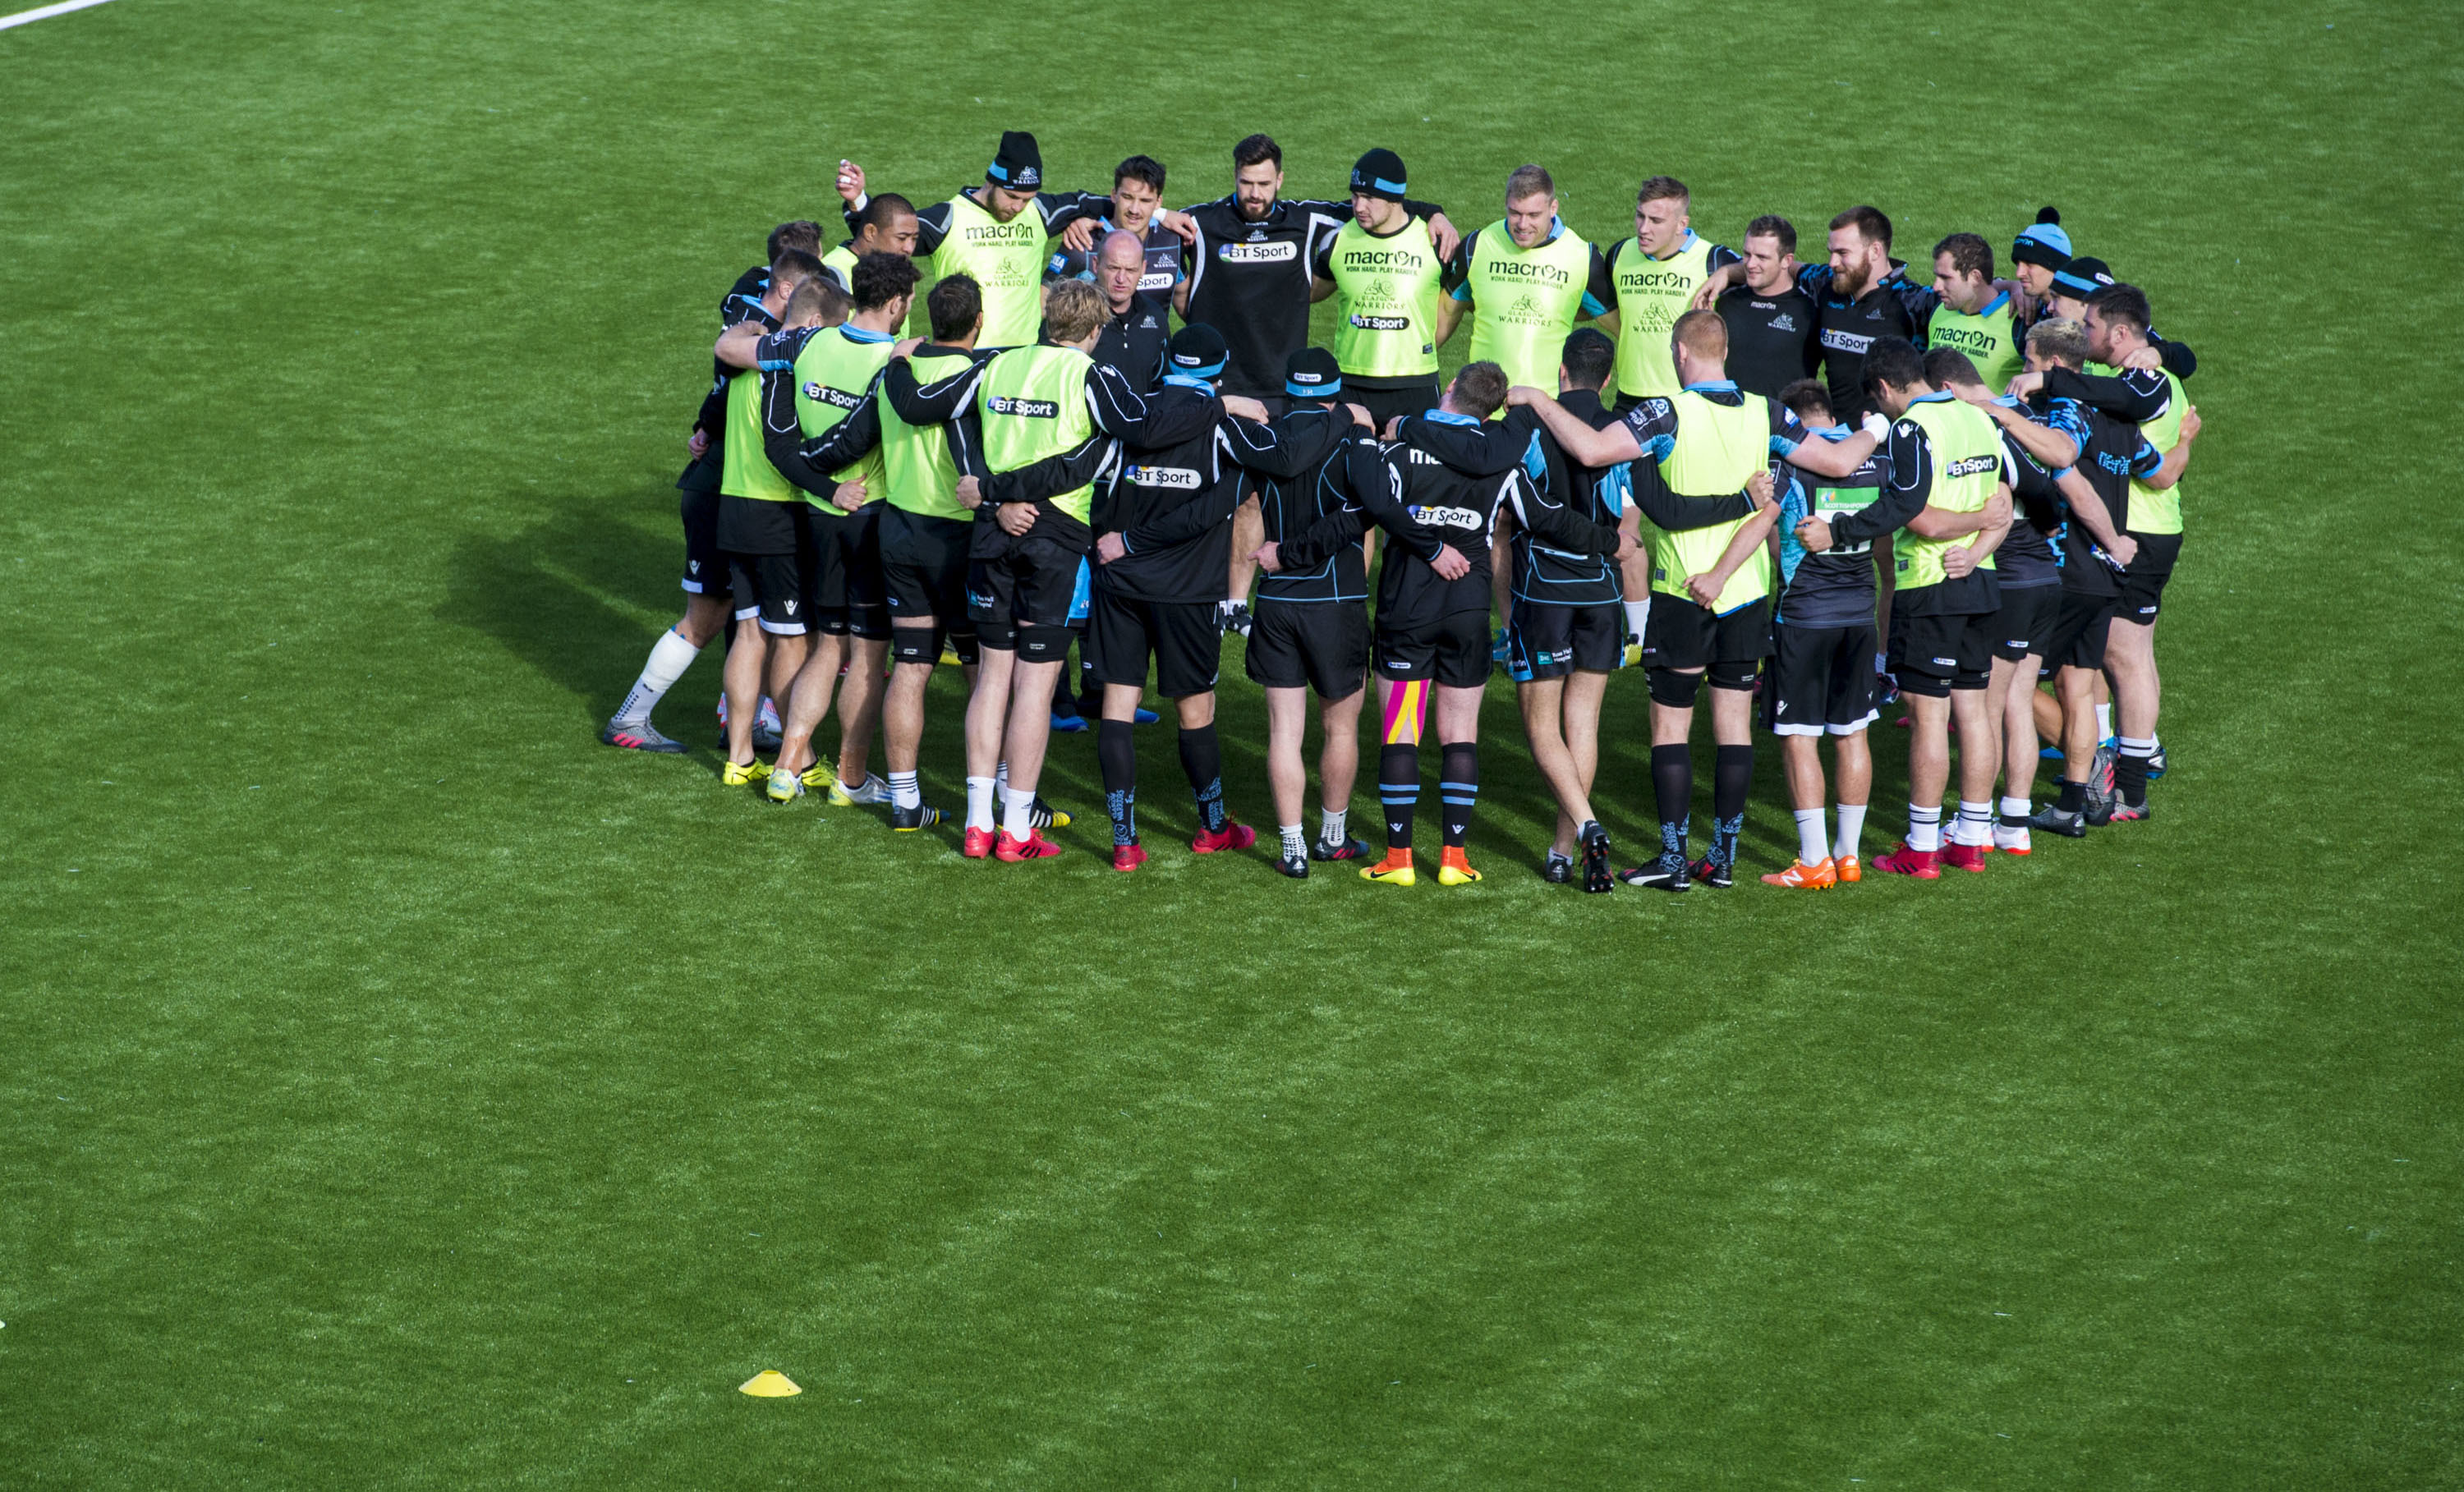 Success in Europe has been missing for the Glasgow Warriors.